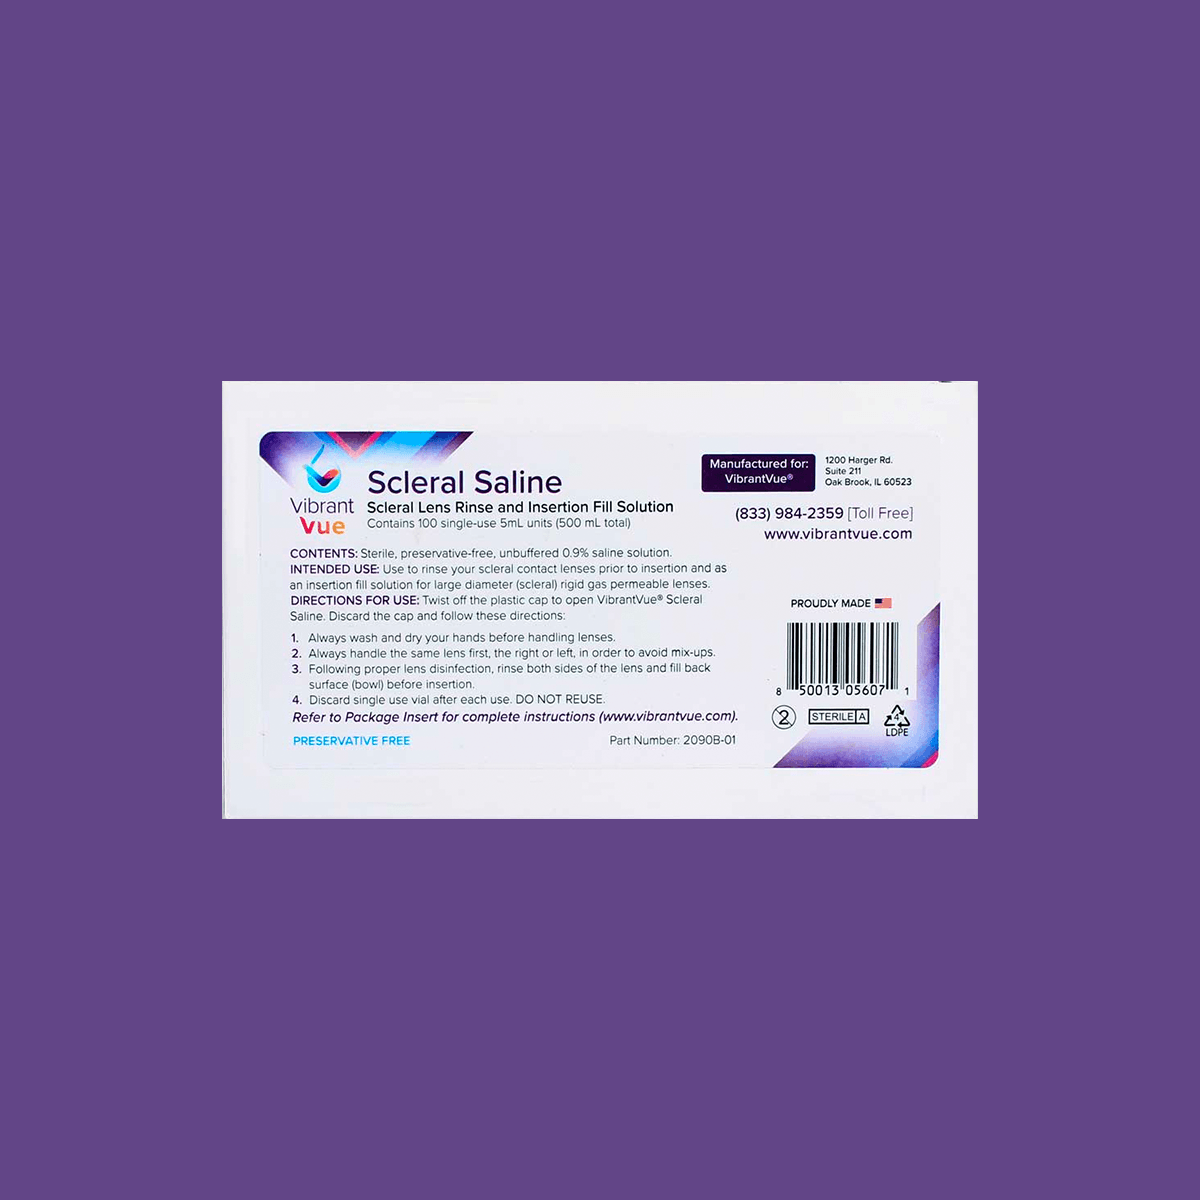 Vibrant Vue Saline Lens Rinse and Insertion Fill Solution, 100% Preservative Free, 100 Vial box - DryEye Rescue Store